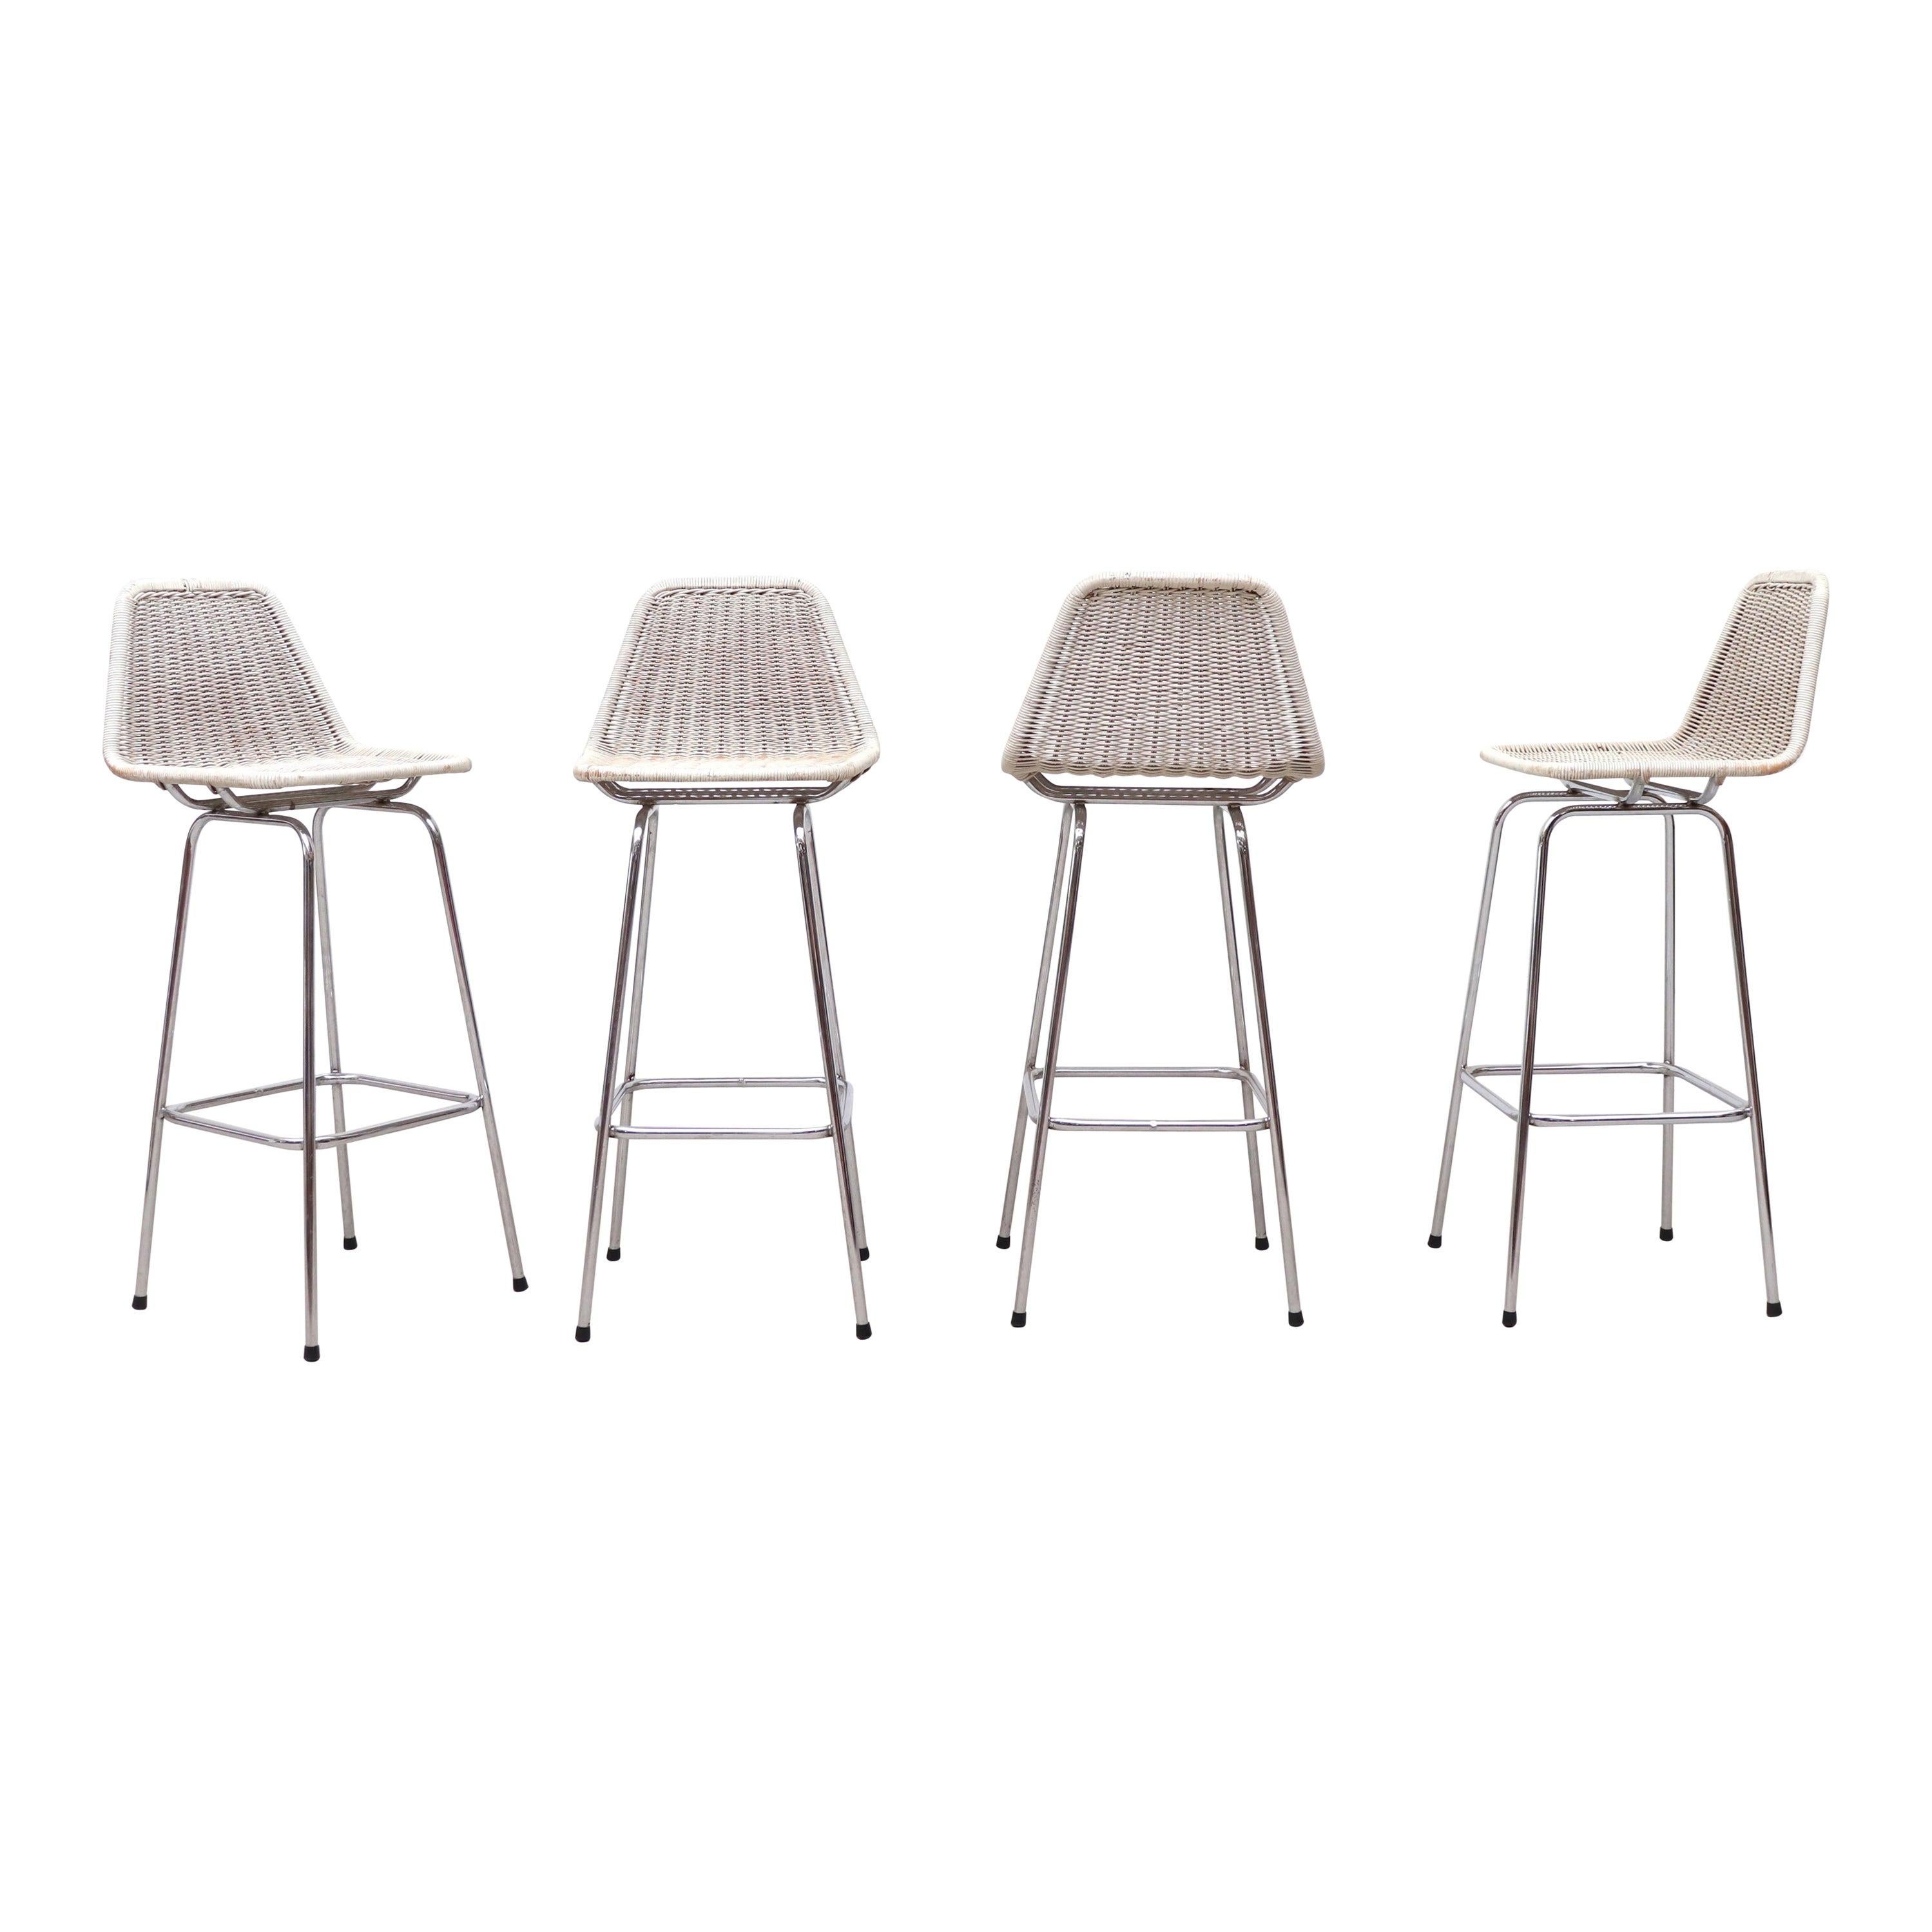 Set of 4 Charlotte Perriand Style Wicker Bar Height Stools with Chrome Legs For Sale